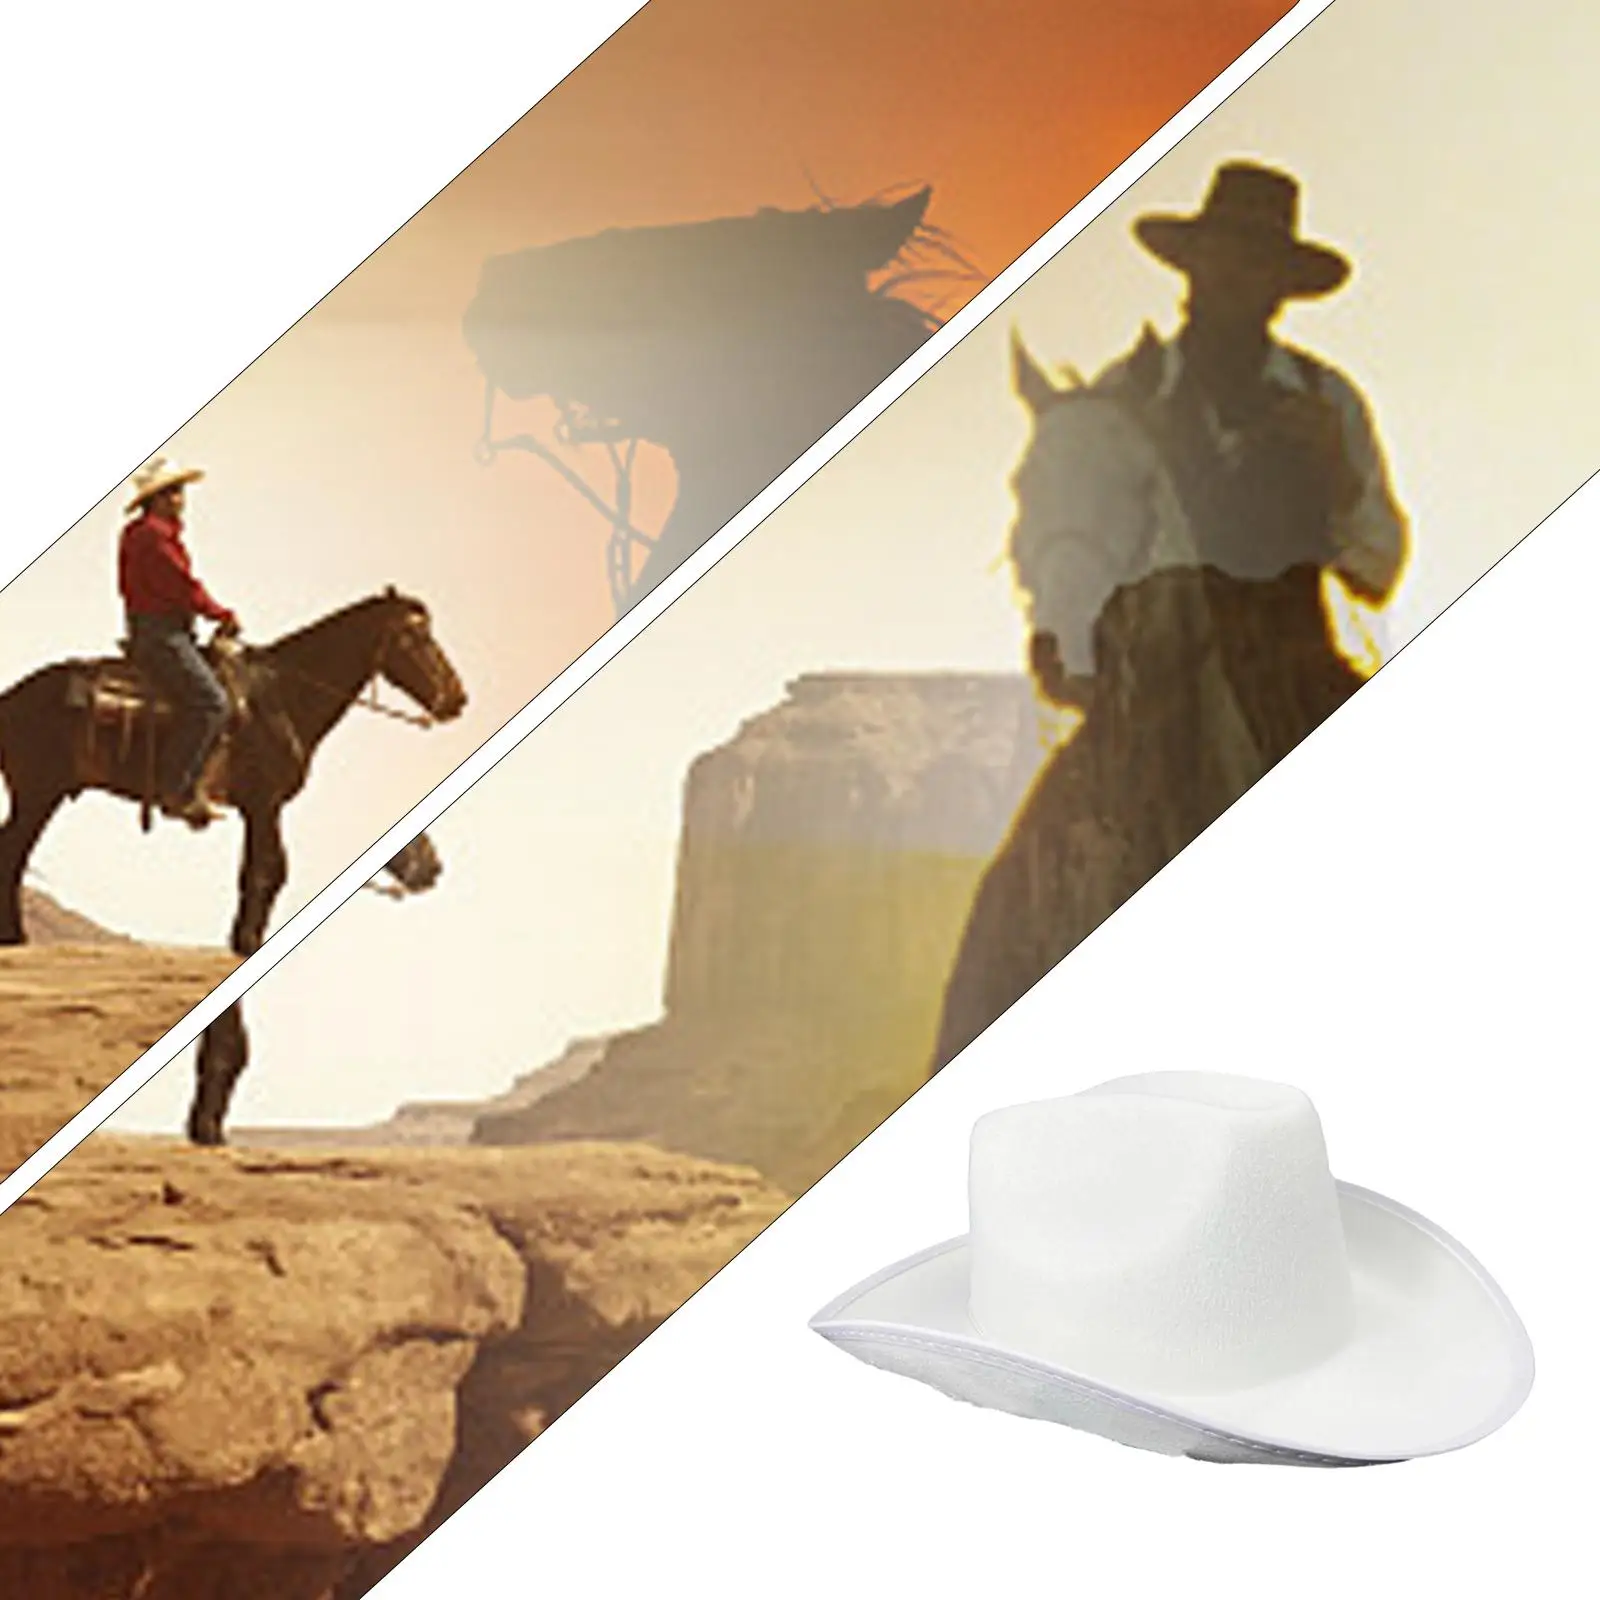 Cowboy Hat Wedding White Blinking Cowgirl Hat for Ladies Party Accessory Fancy Dress Cosplay Music Festival Concerts